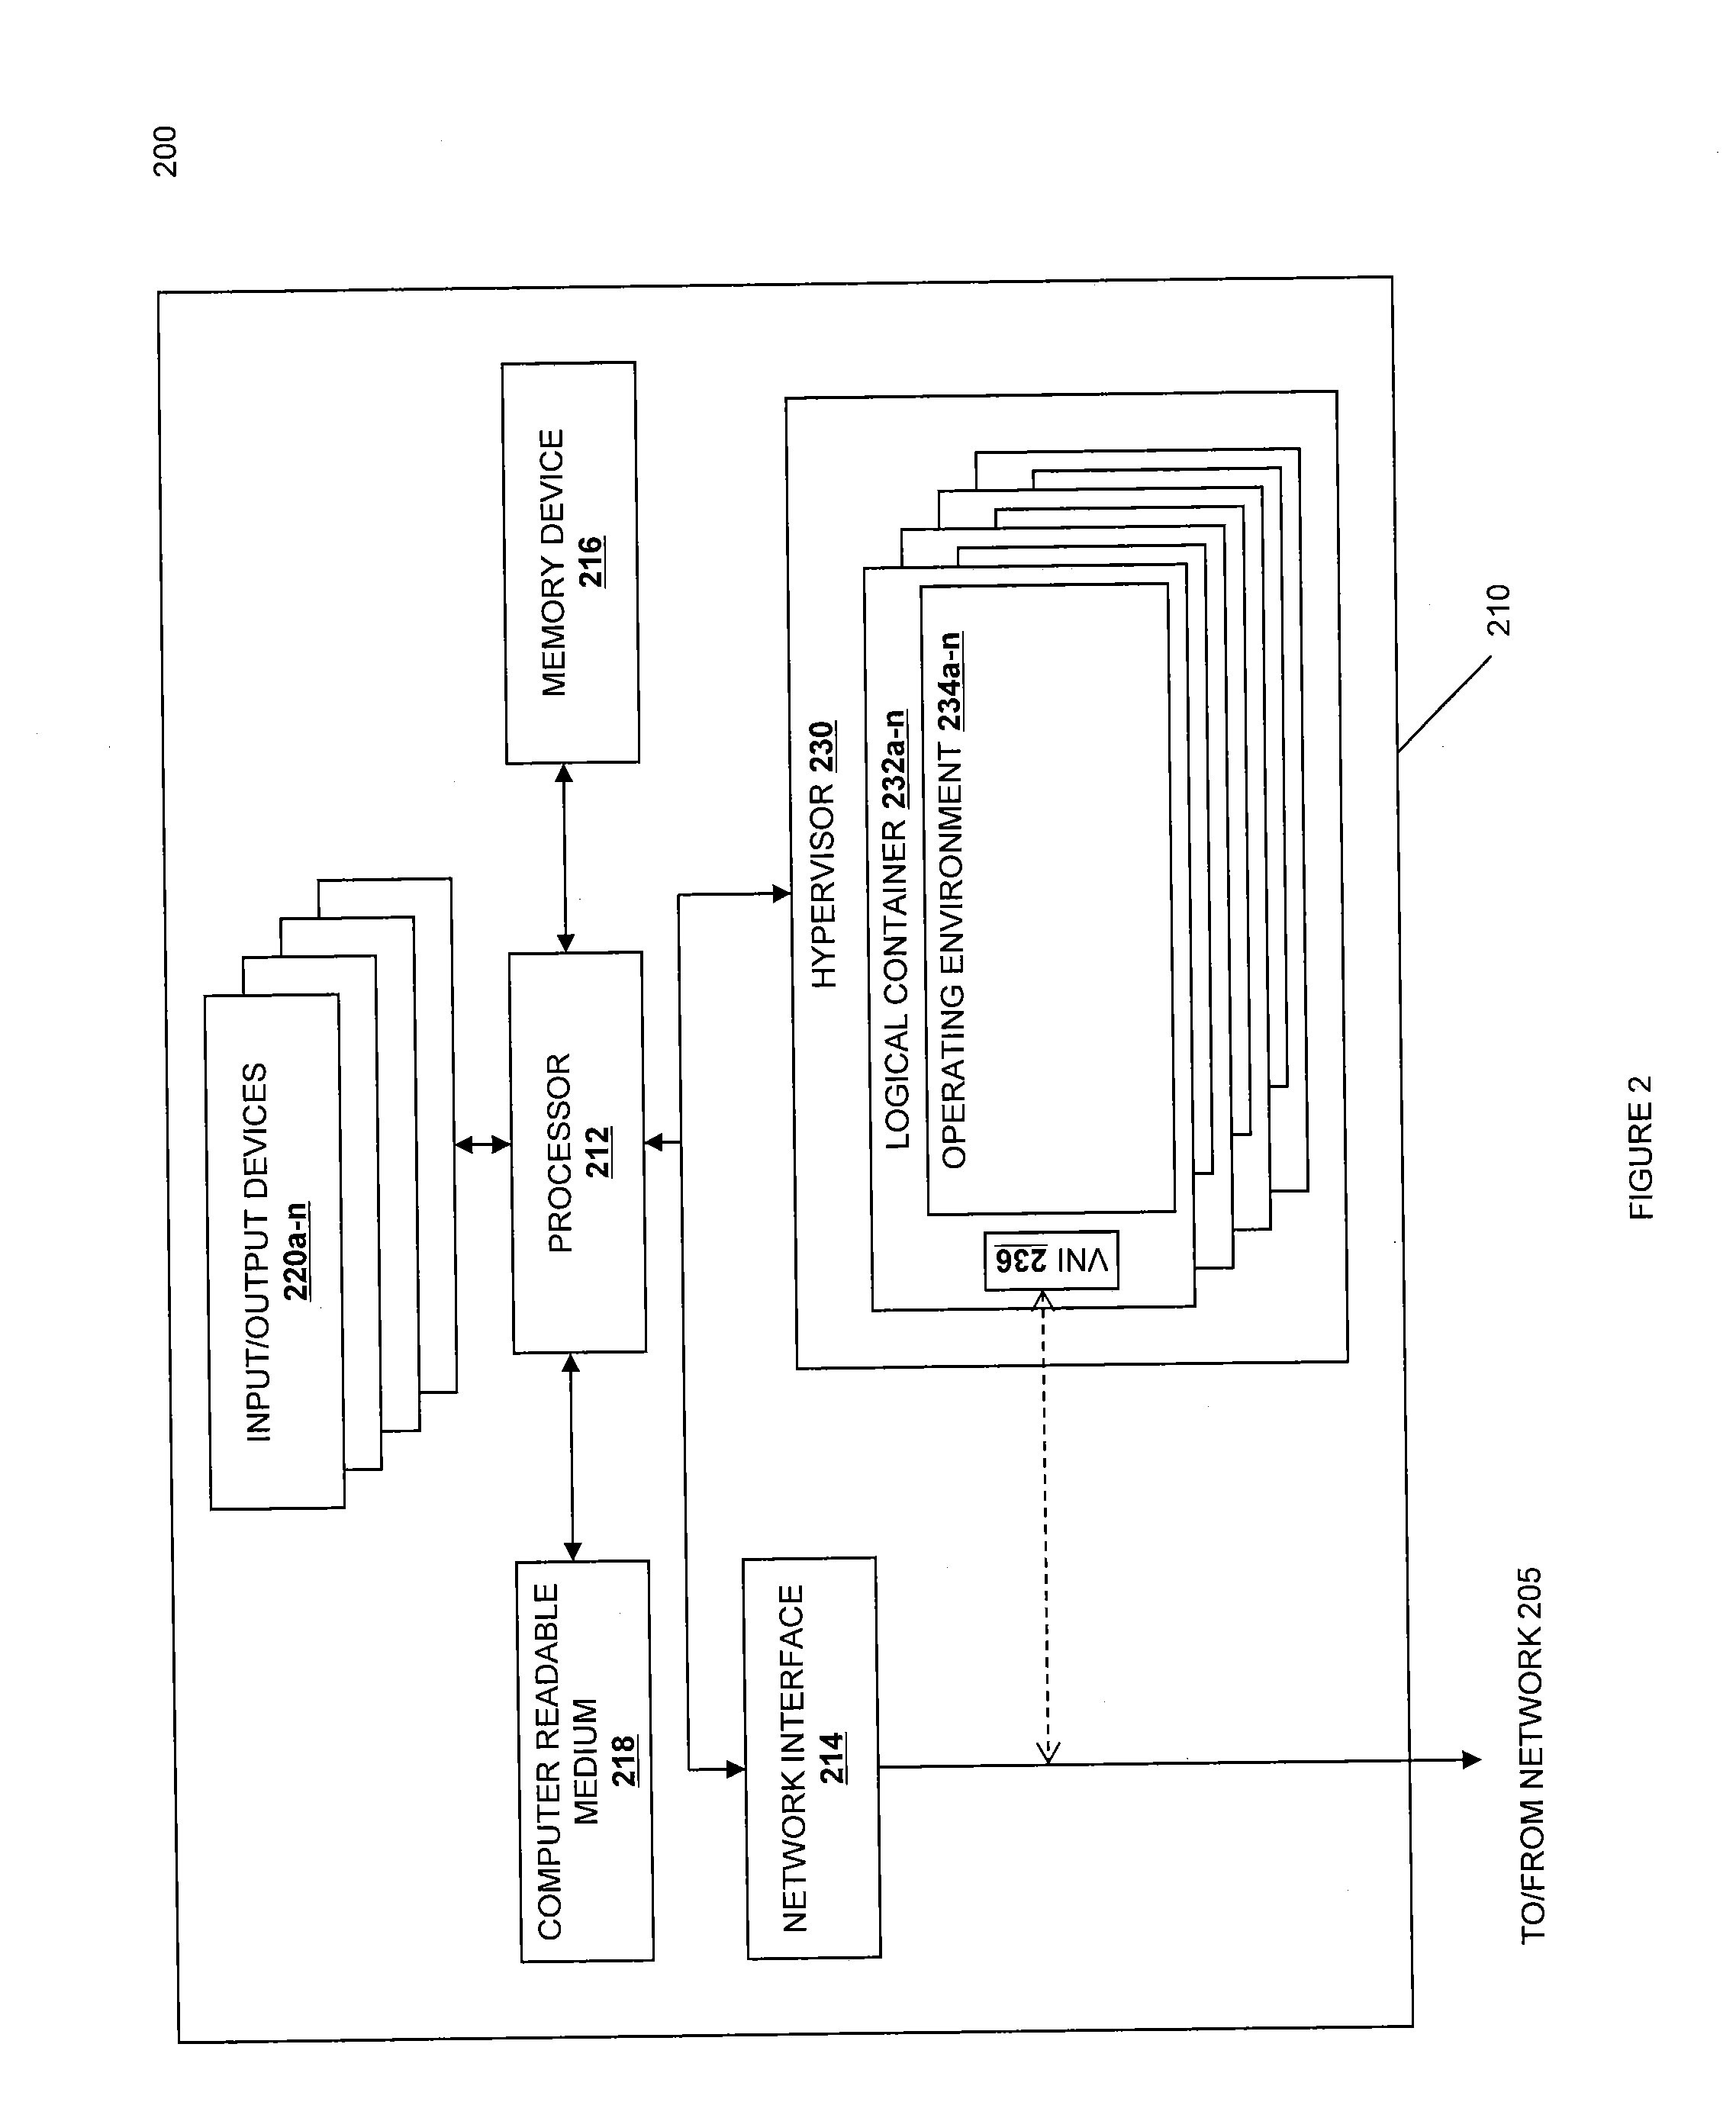 Method and System for Identity-Based Authentication of Virtual Machines